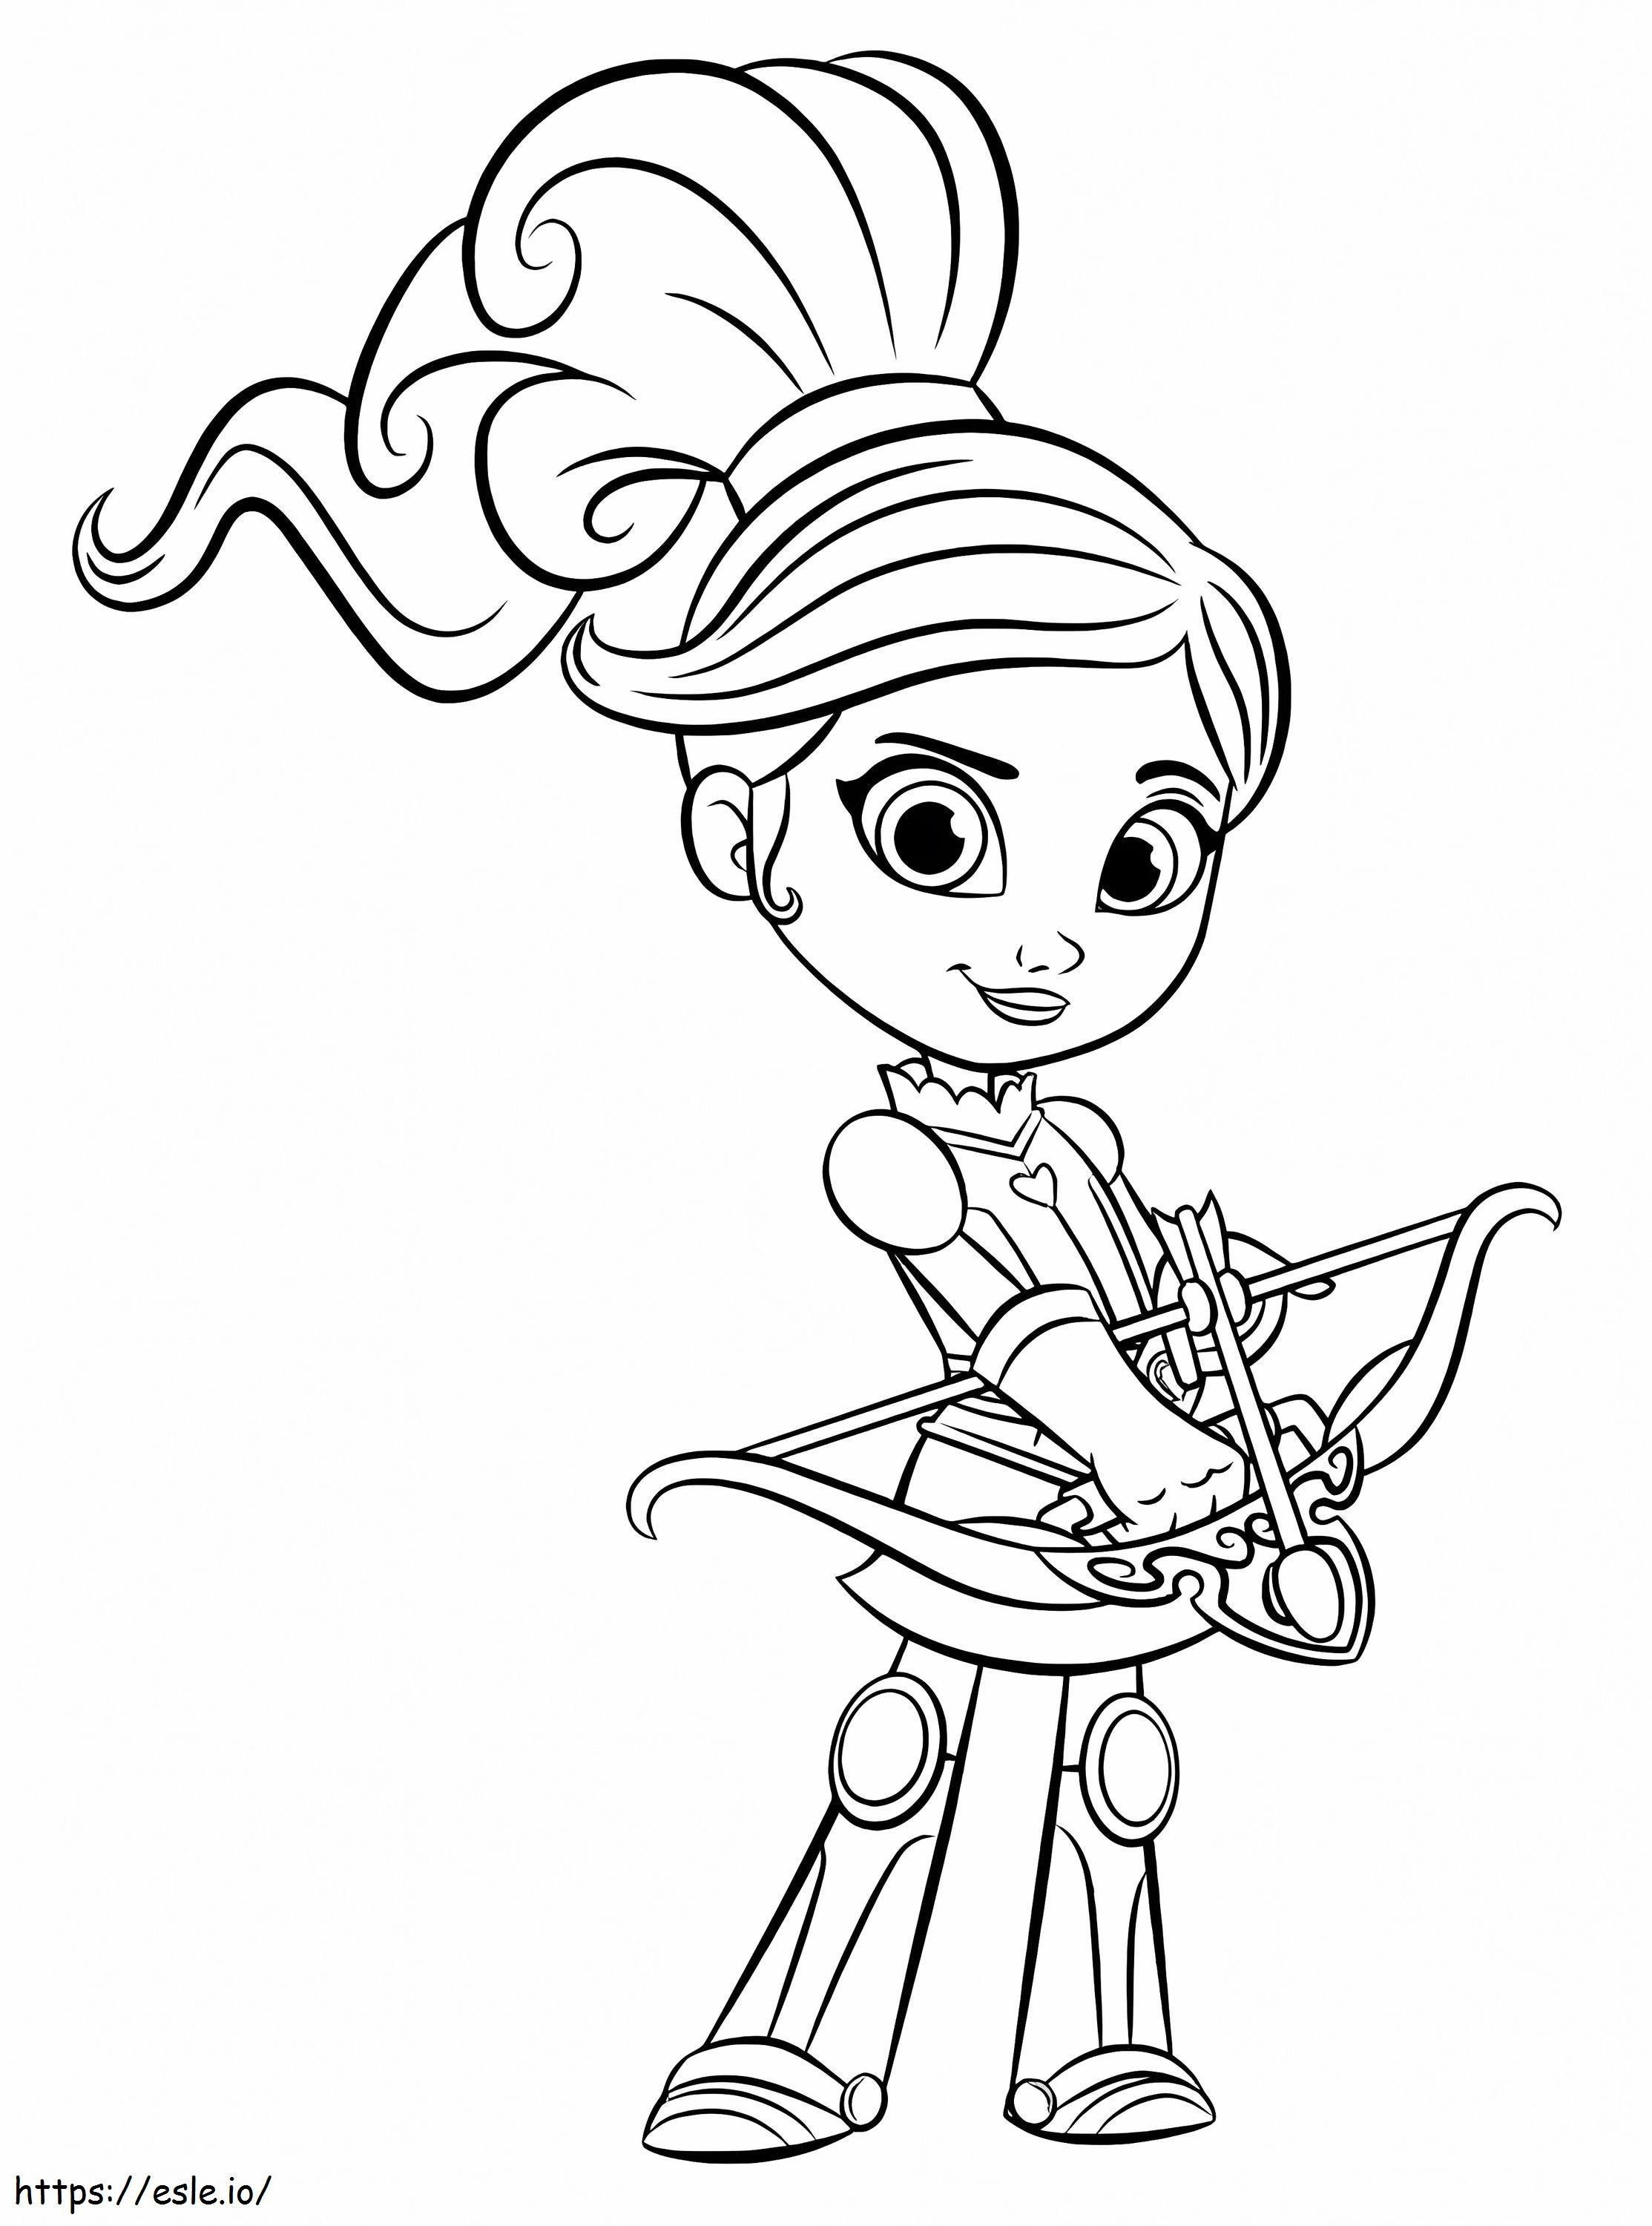 In Princess Knight coloring page